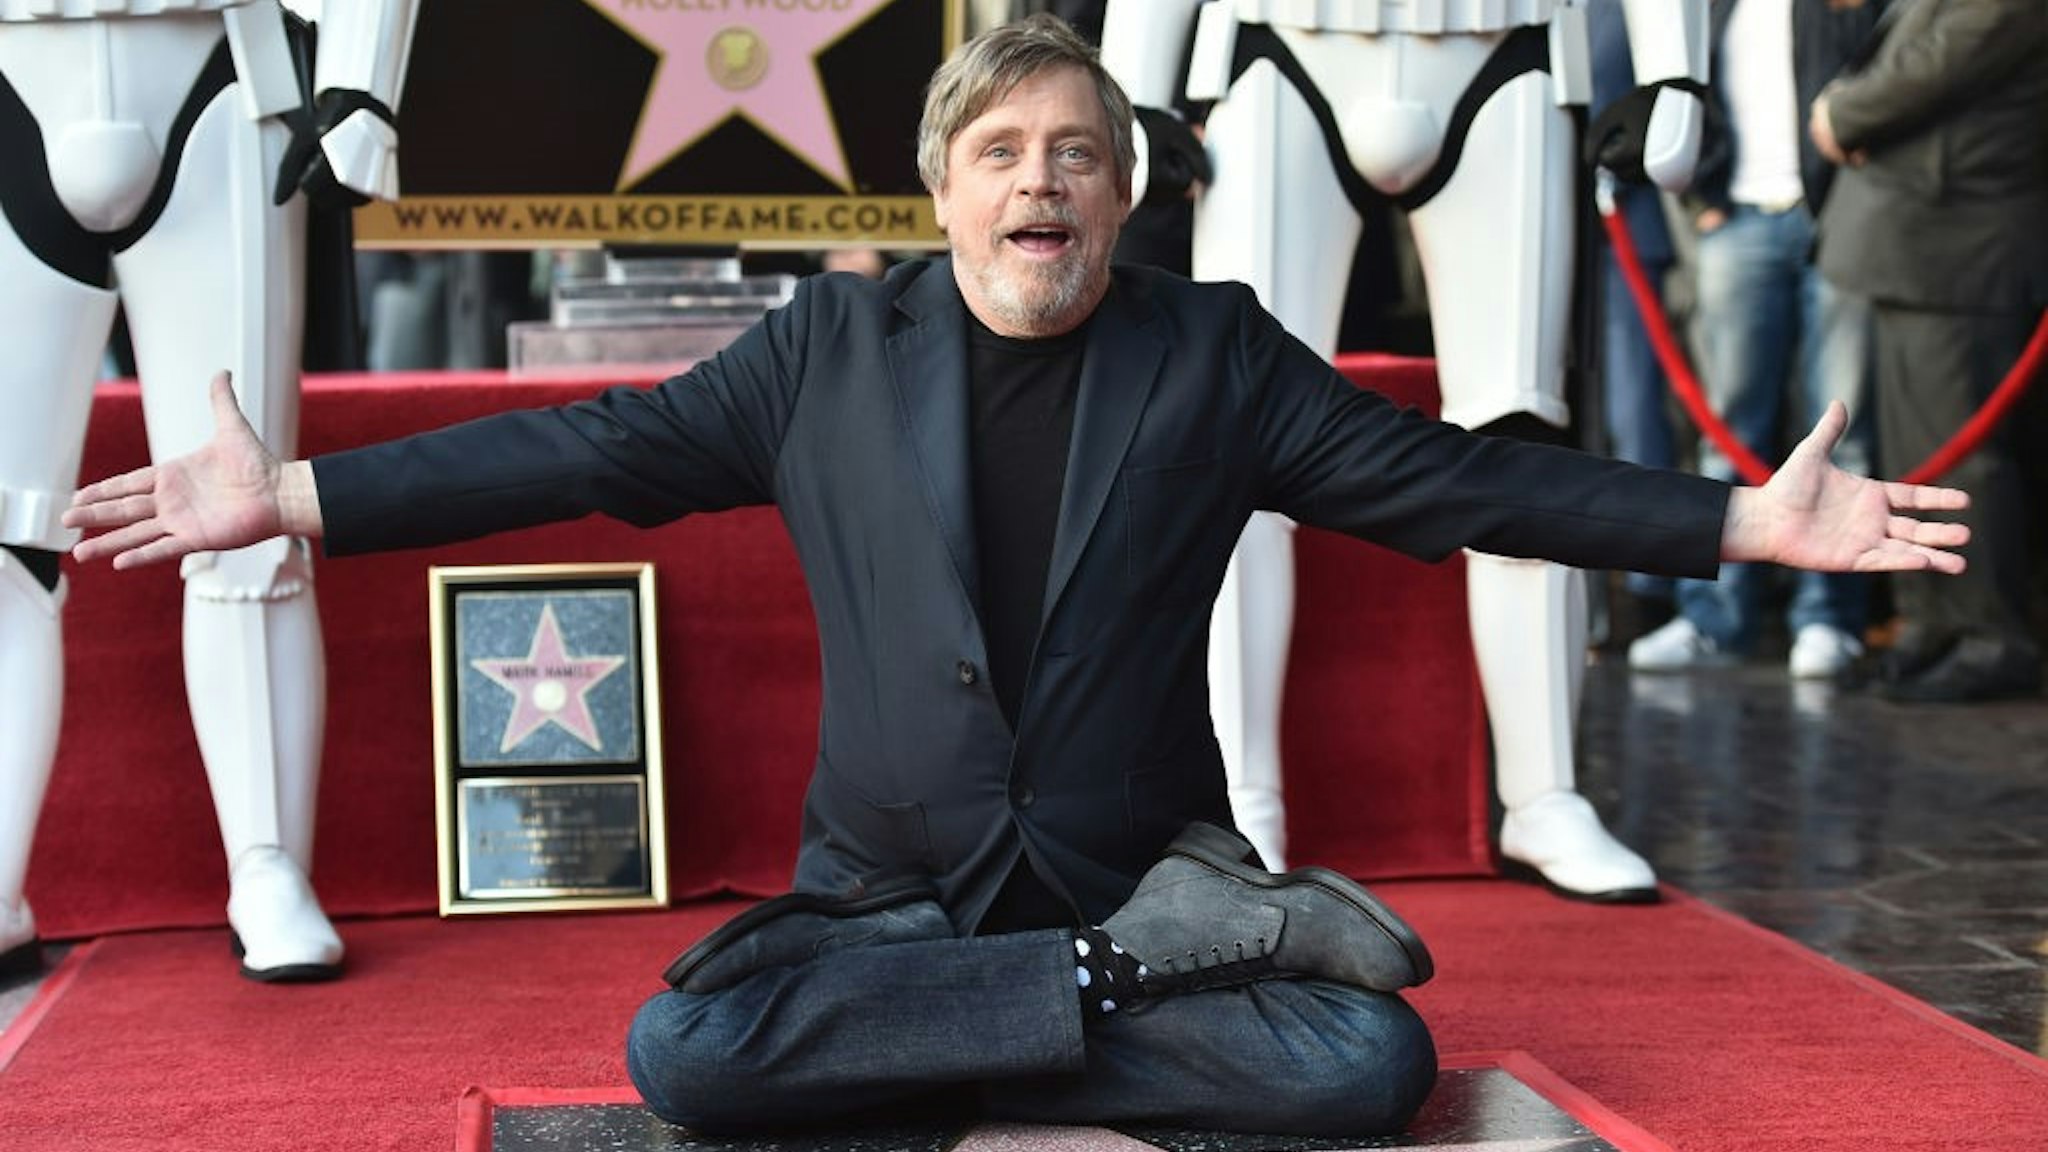 Mark Hamill is honored with a star on the Hollywood Walk of Fame on March 8, 2018 in Hollywood, California.